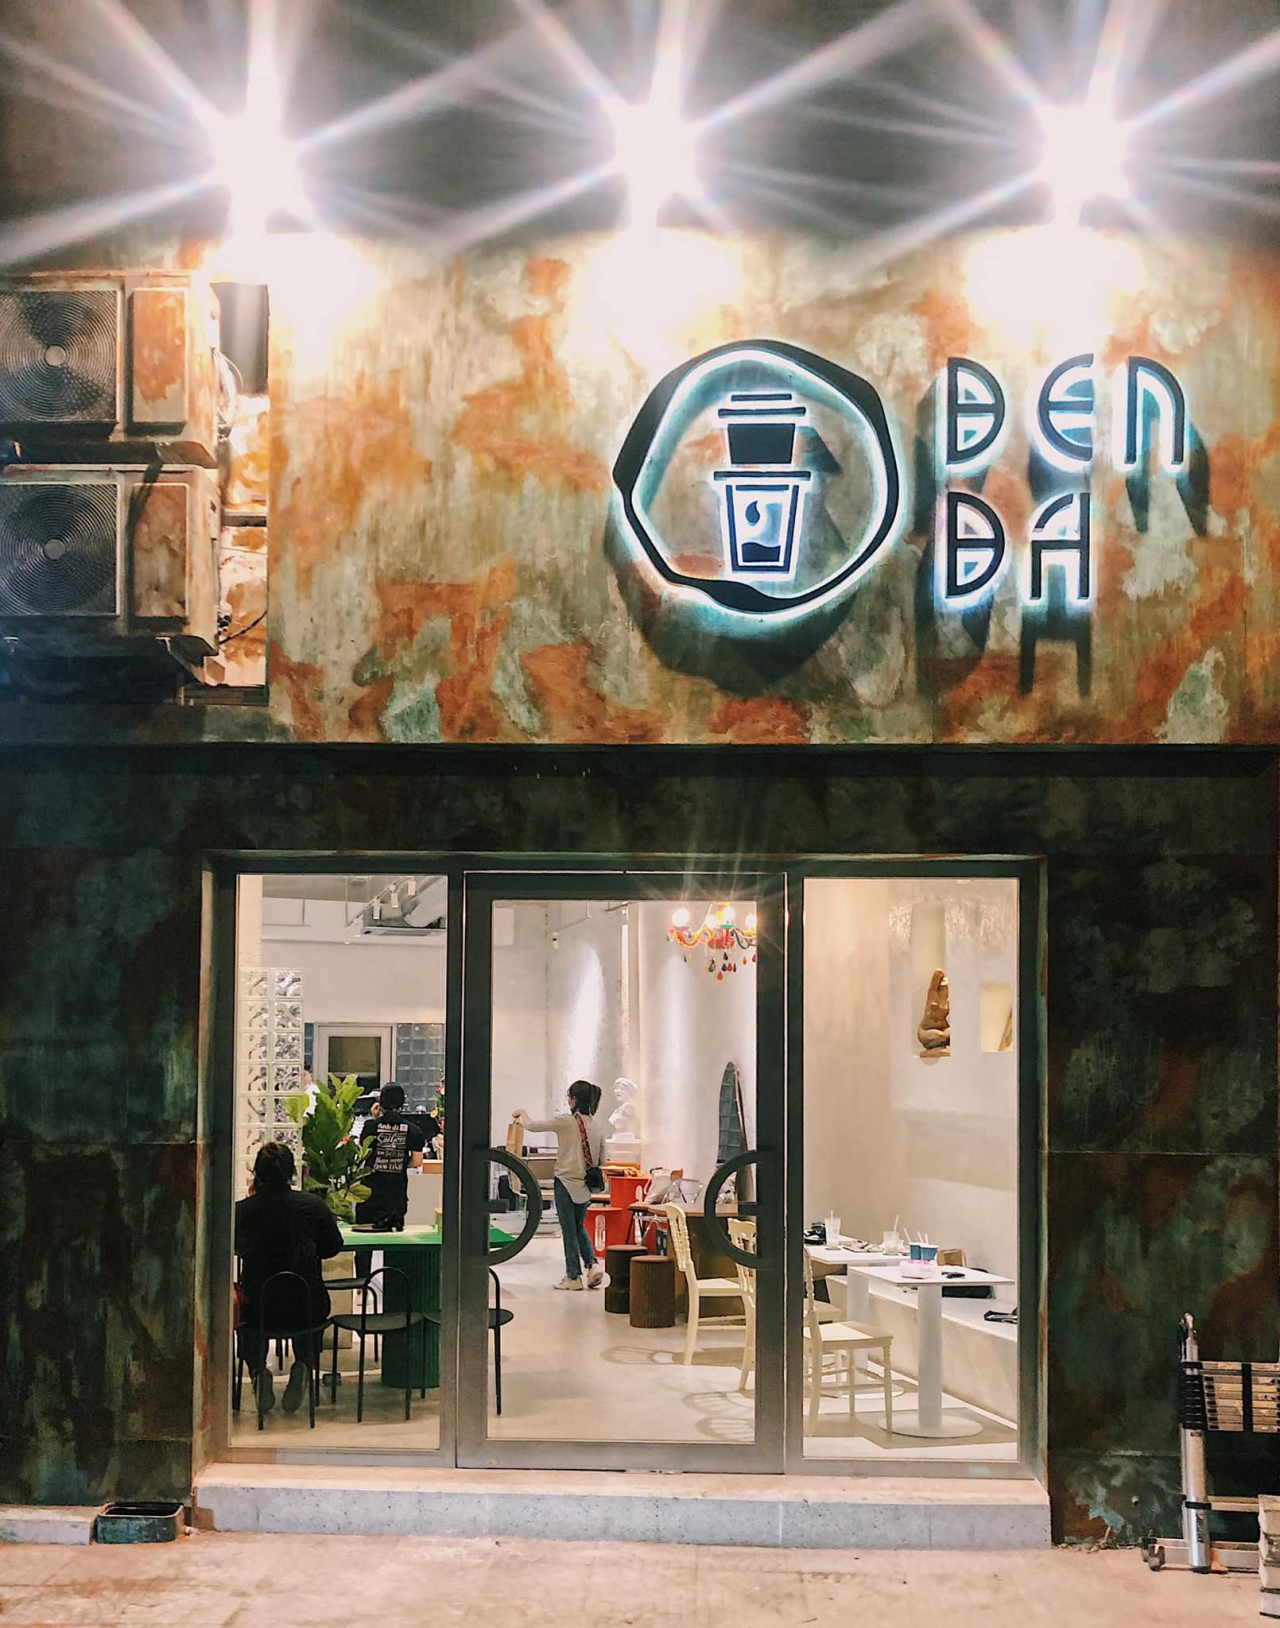 Get Lost In Den Da Coffee – The Oldest Cafe In The Heart Of Ho Chi Minh City